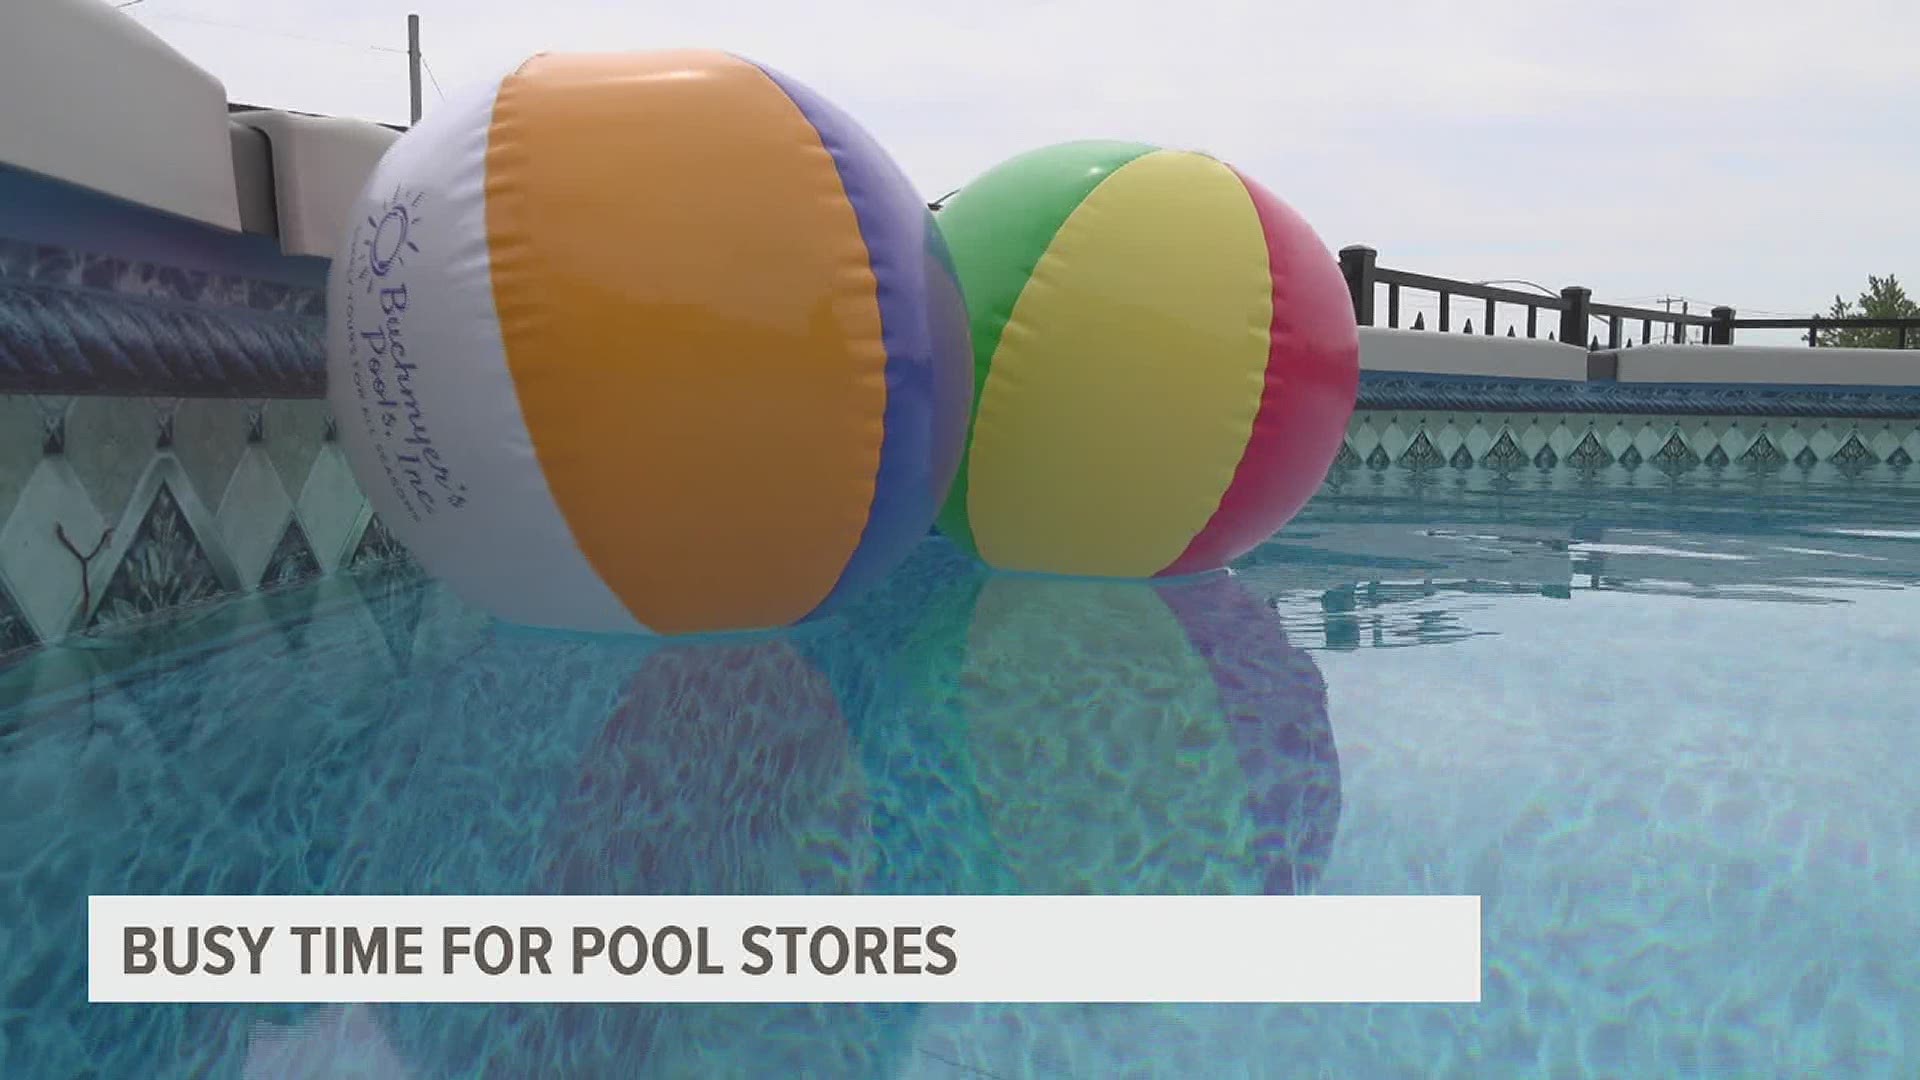 At Buchmyer's Pools, in-ground pools are sold out until next September. The owner says customers have already put deposits down on pools for 2023.